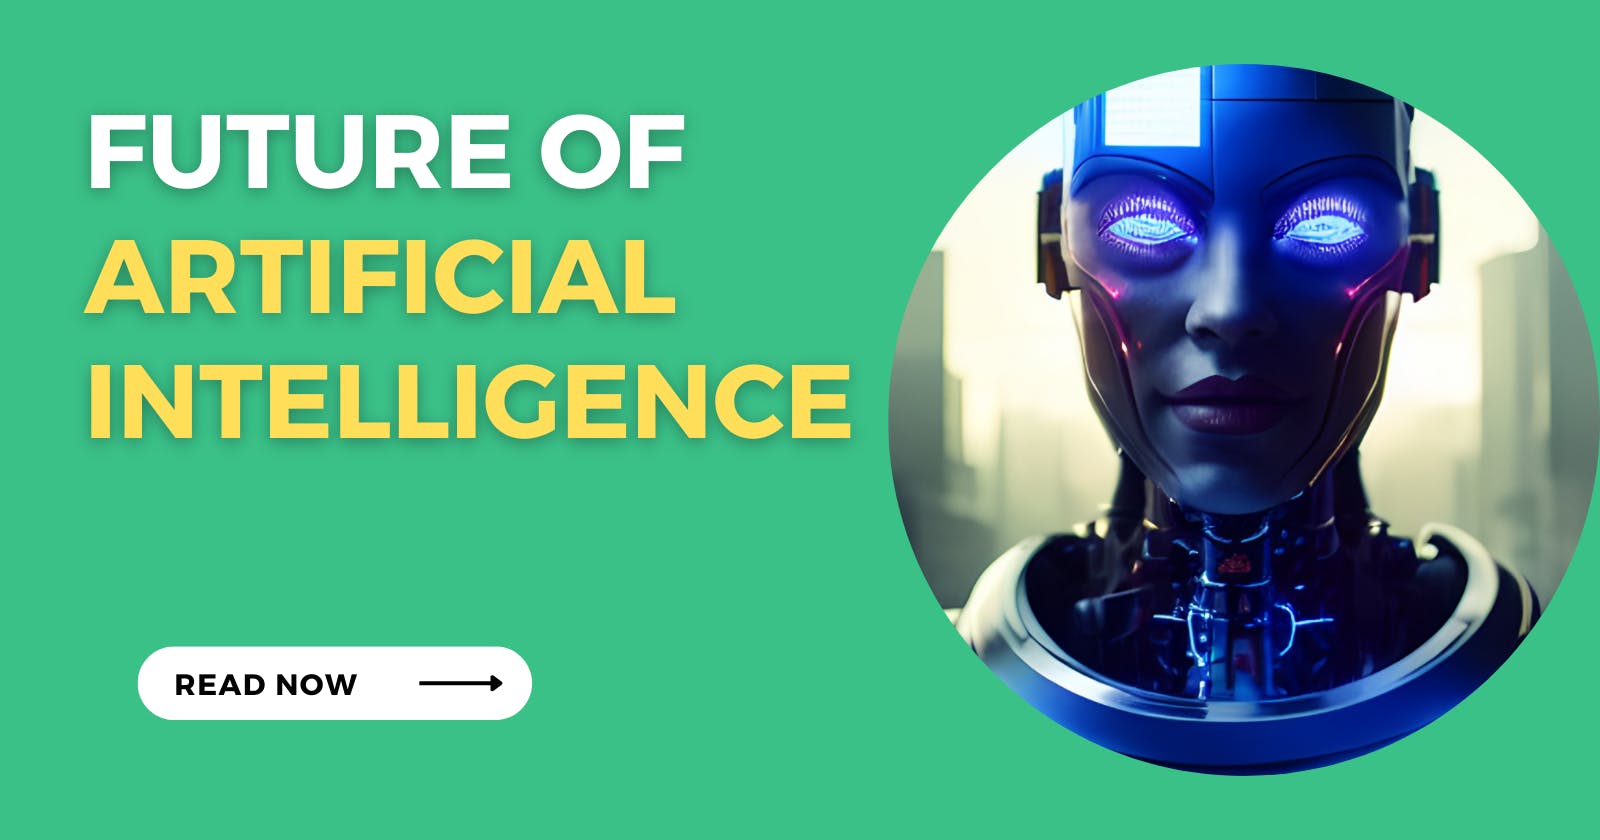 "The Rise of AI: Exploring the Limitless Potential and Exciting Developments in Artificial Intelligence"